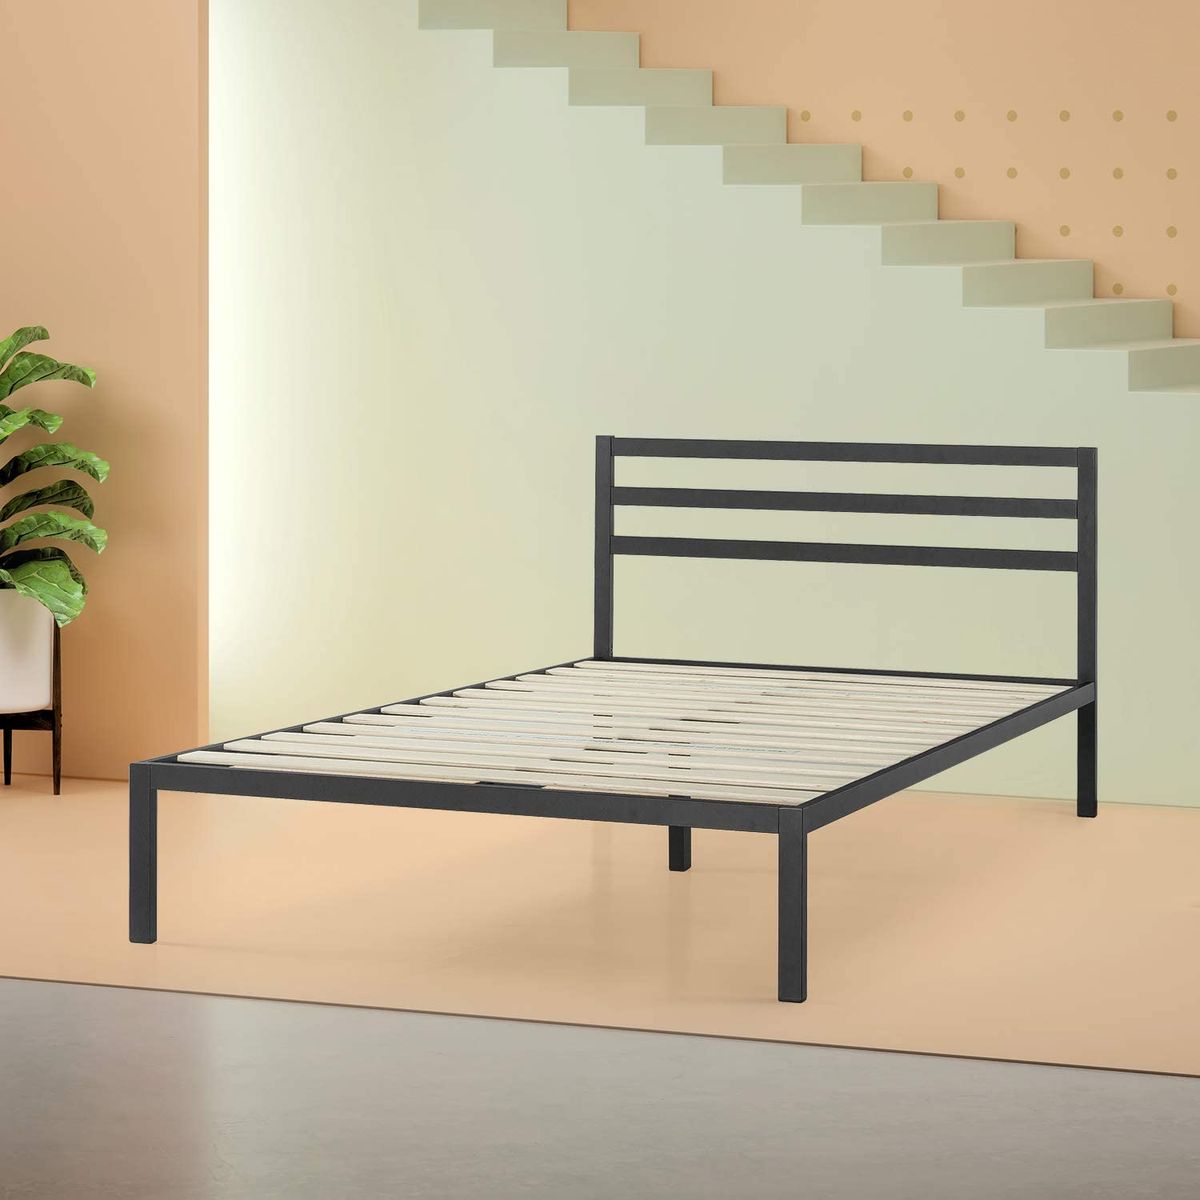 19 Best Metal Bed Frames 2020 The, How To Set Up A Metal Bed Frame